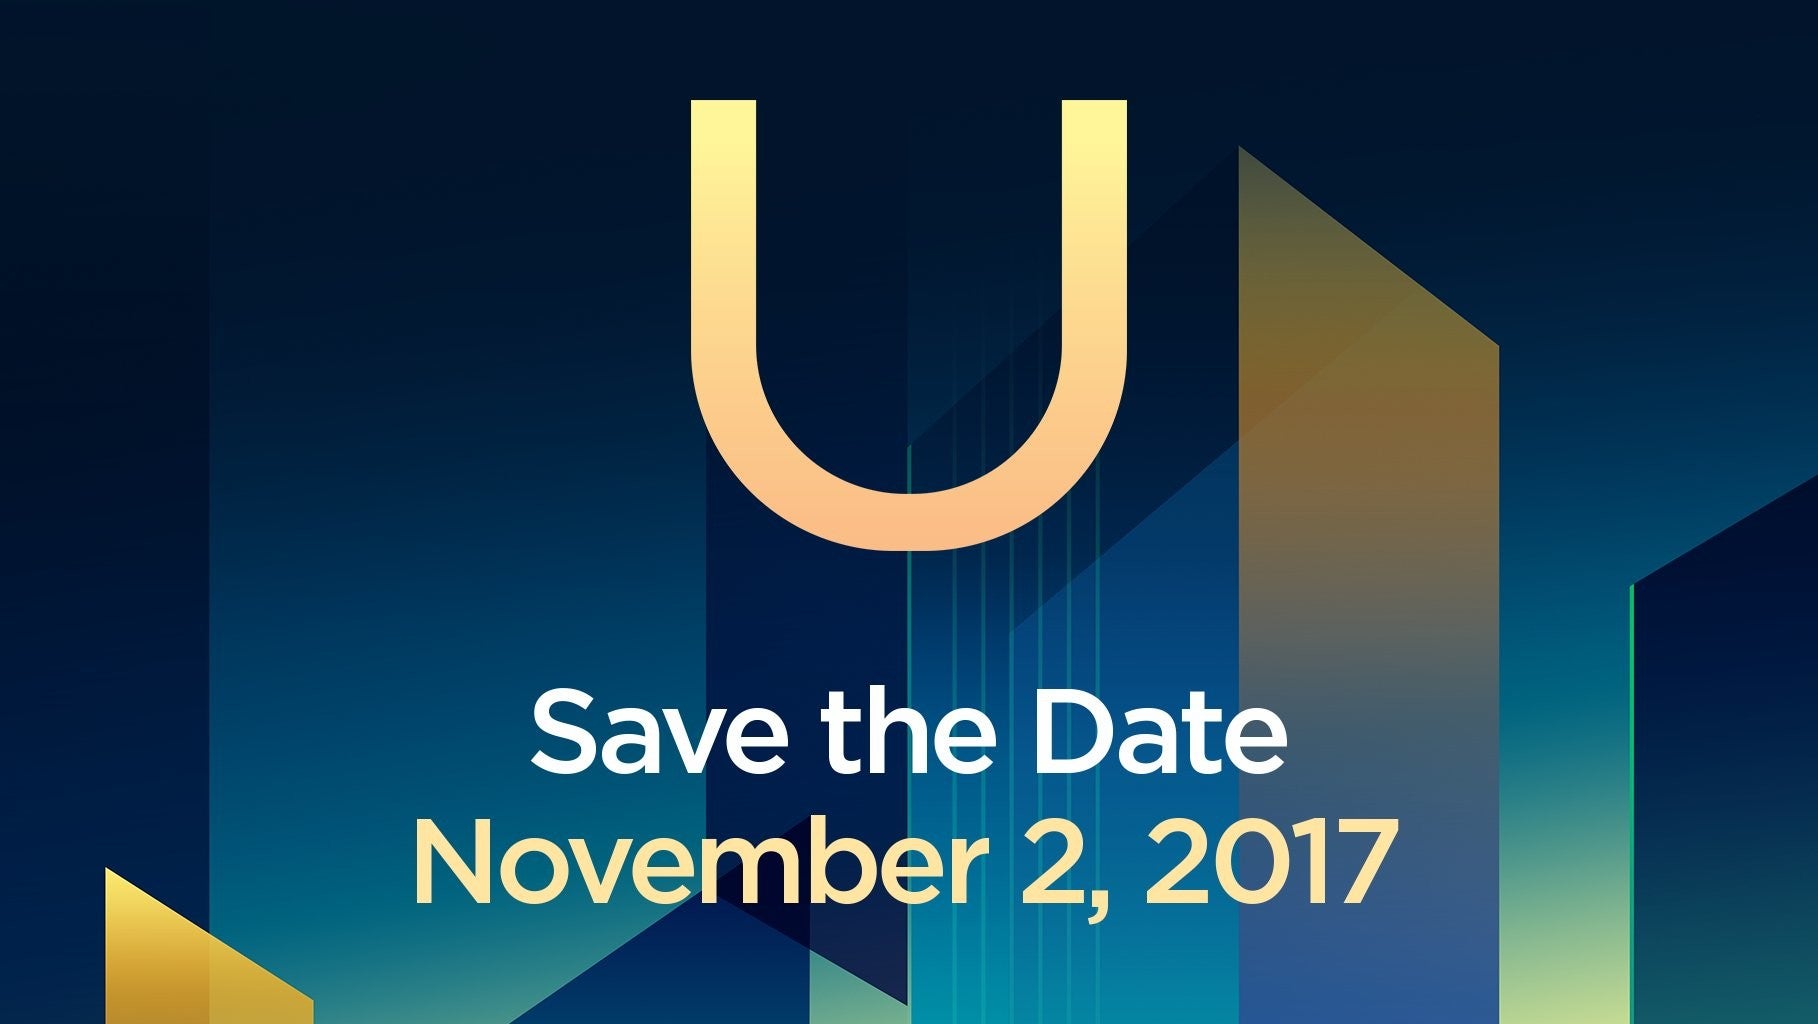 It's official: HTC U11 Plus will be unveiled on November 2